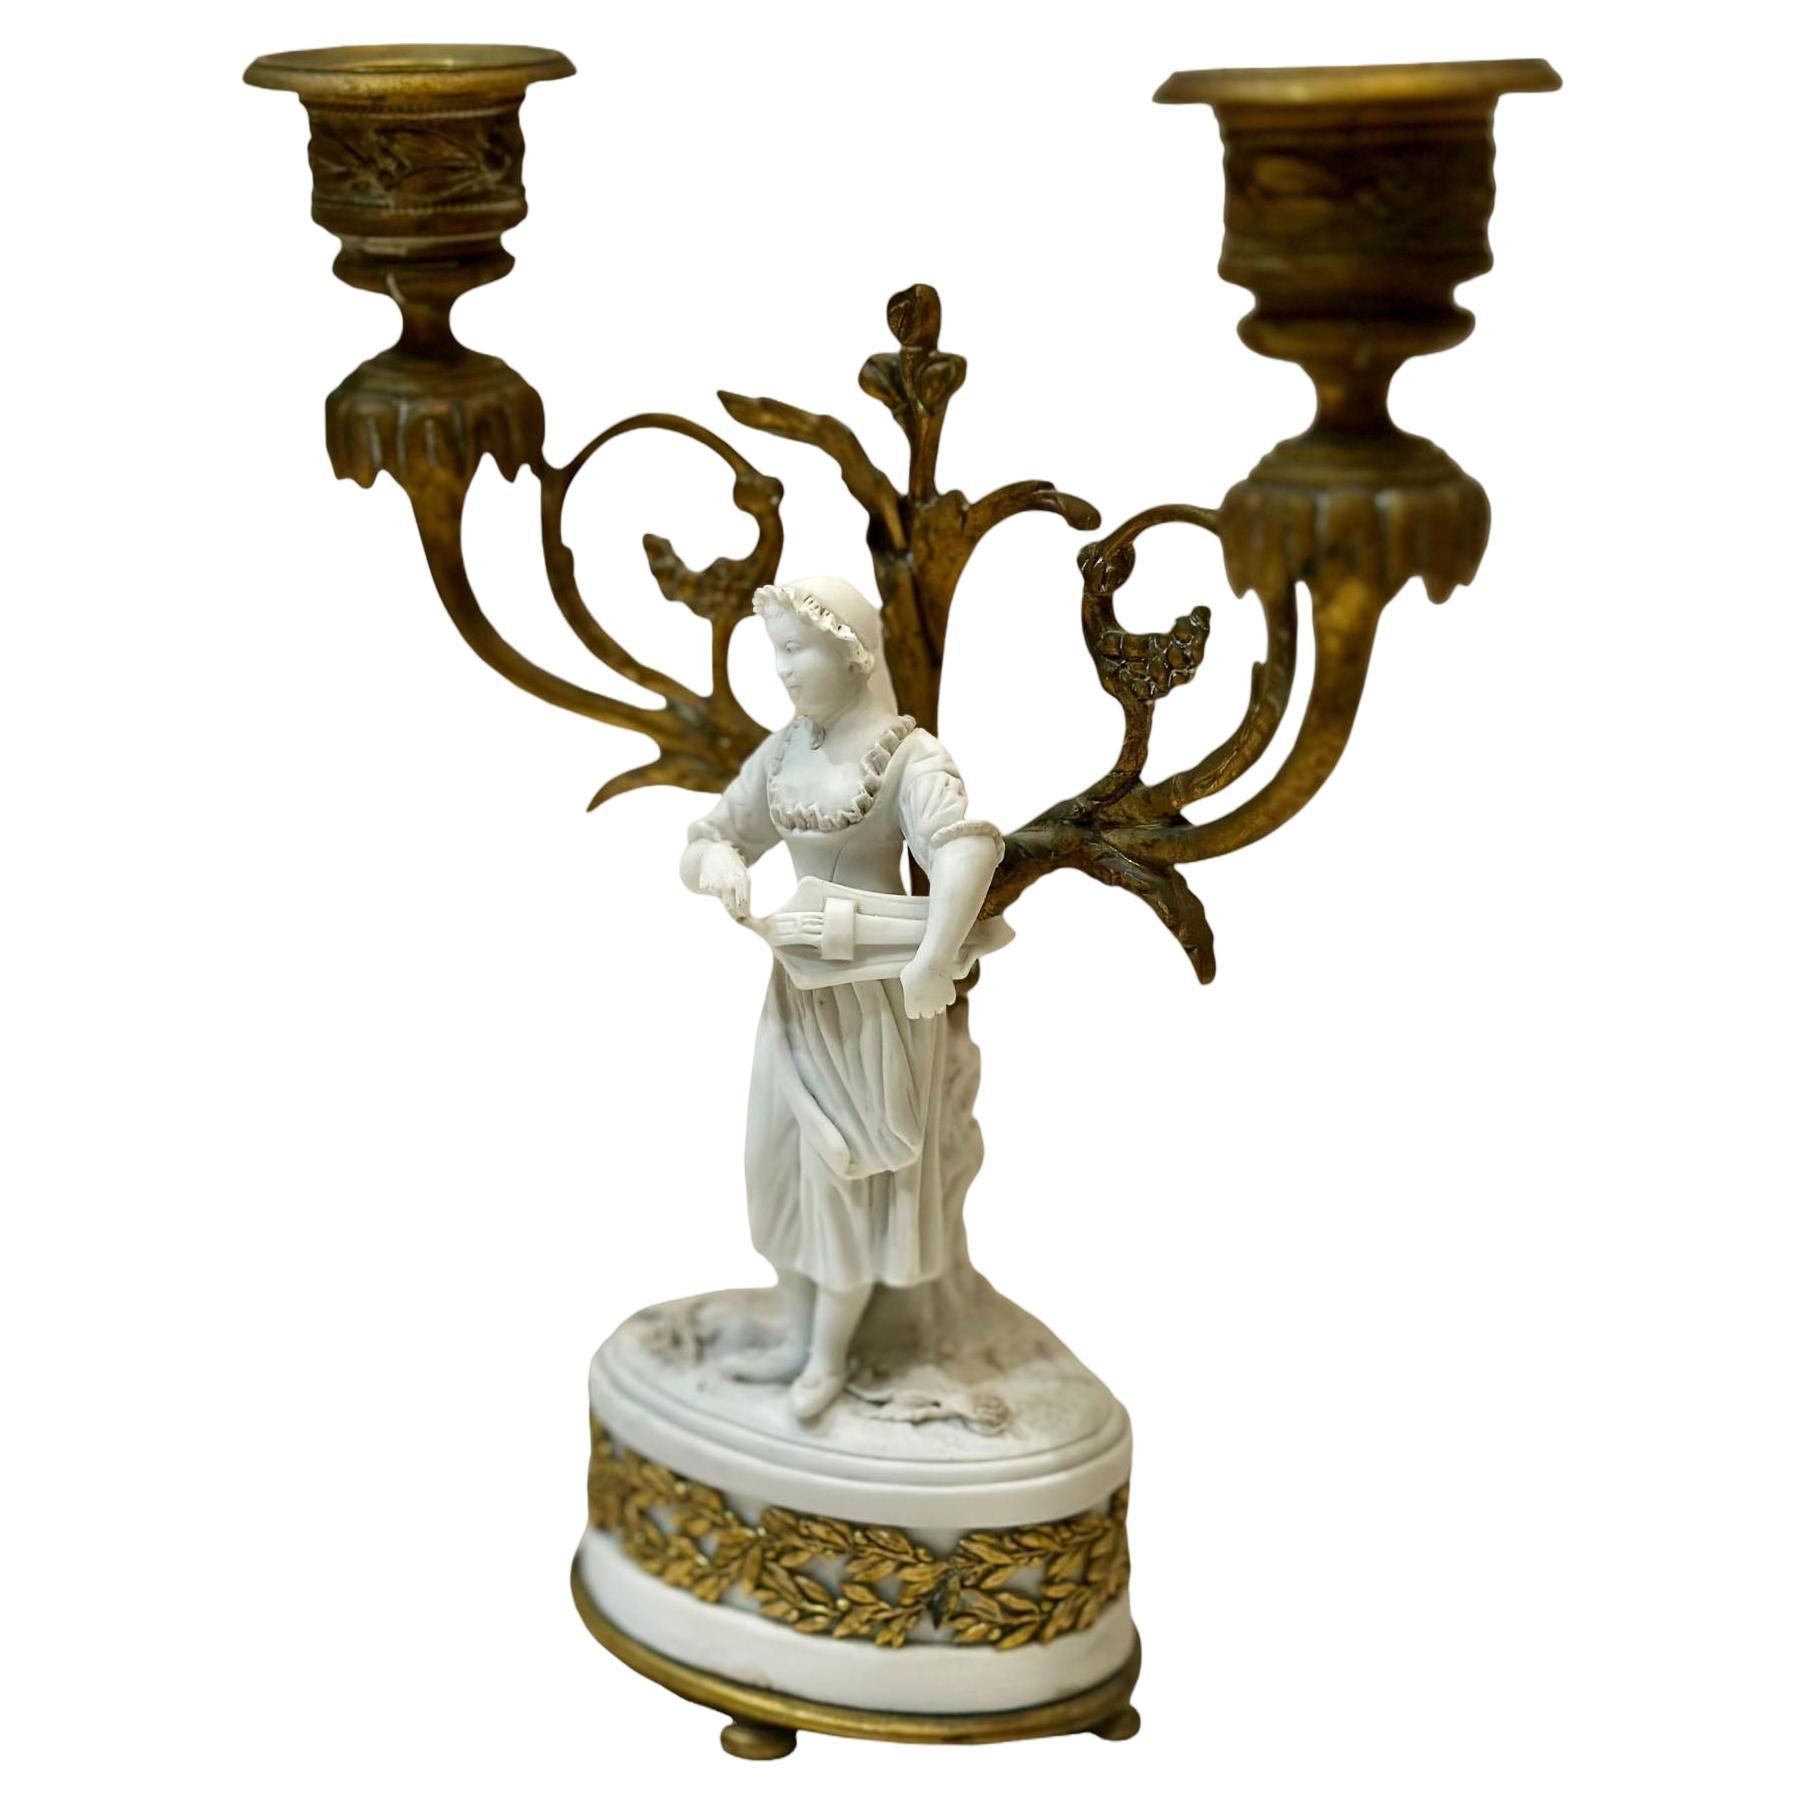 A French double arm candlestick with a bisque figure of a woman with bronze dore fittings. It is late 19th century, France.